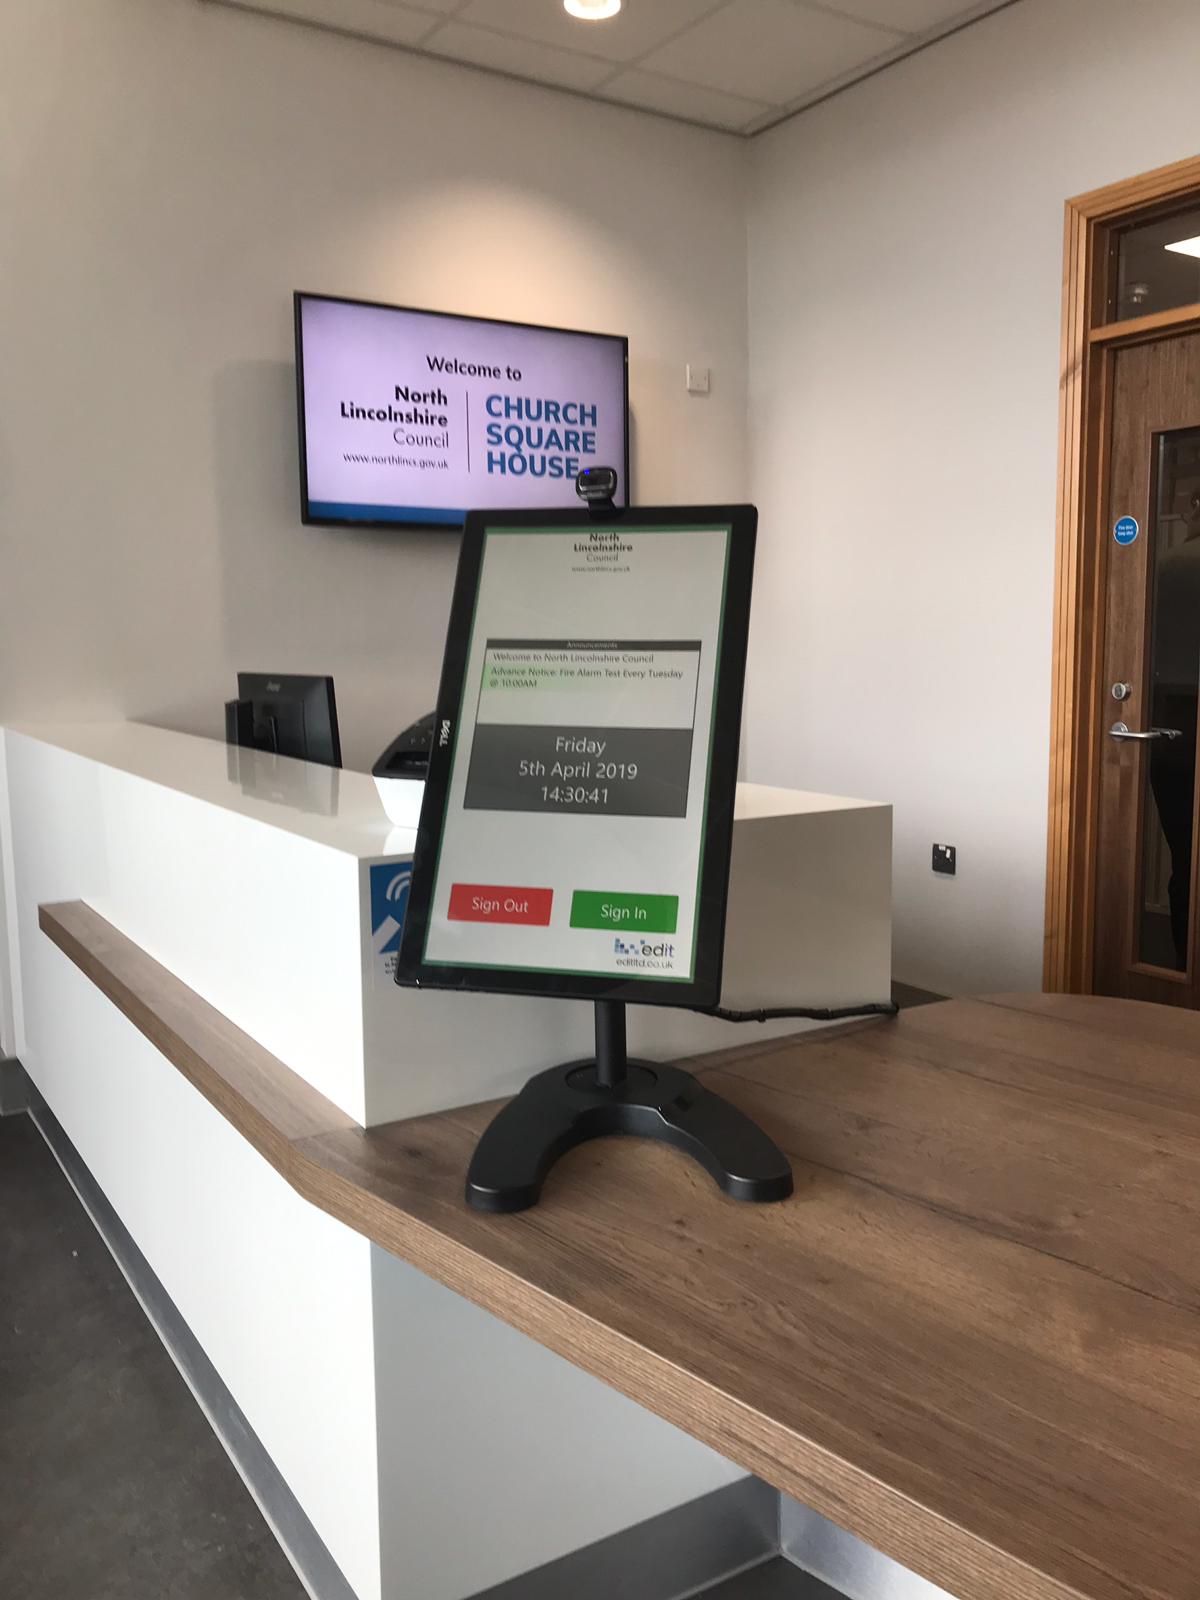 Visitor Management system at North Lincolnshire Council.